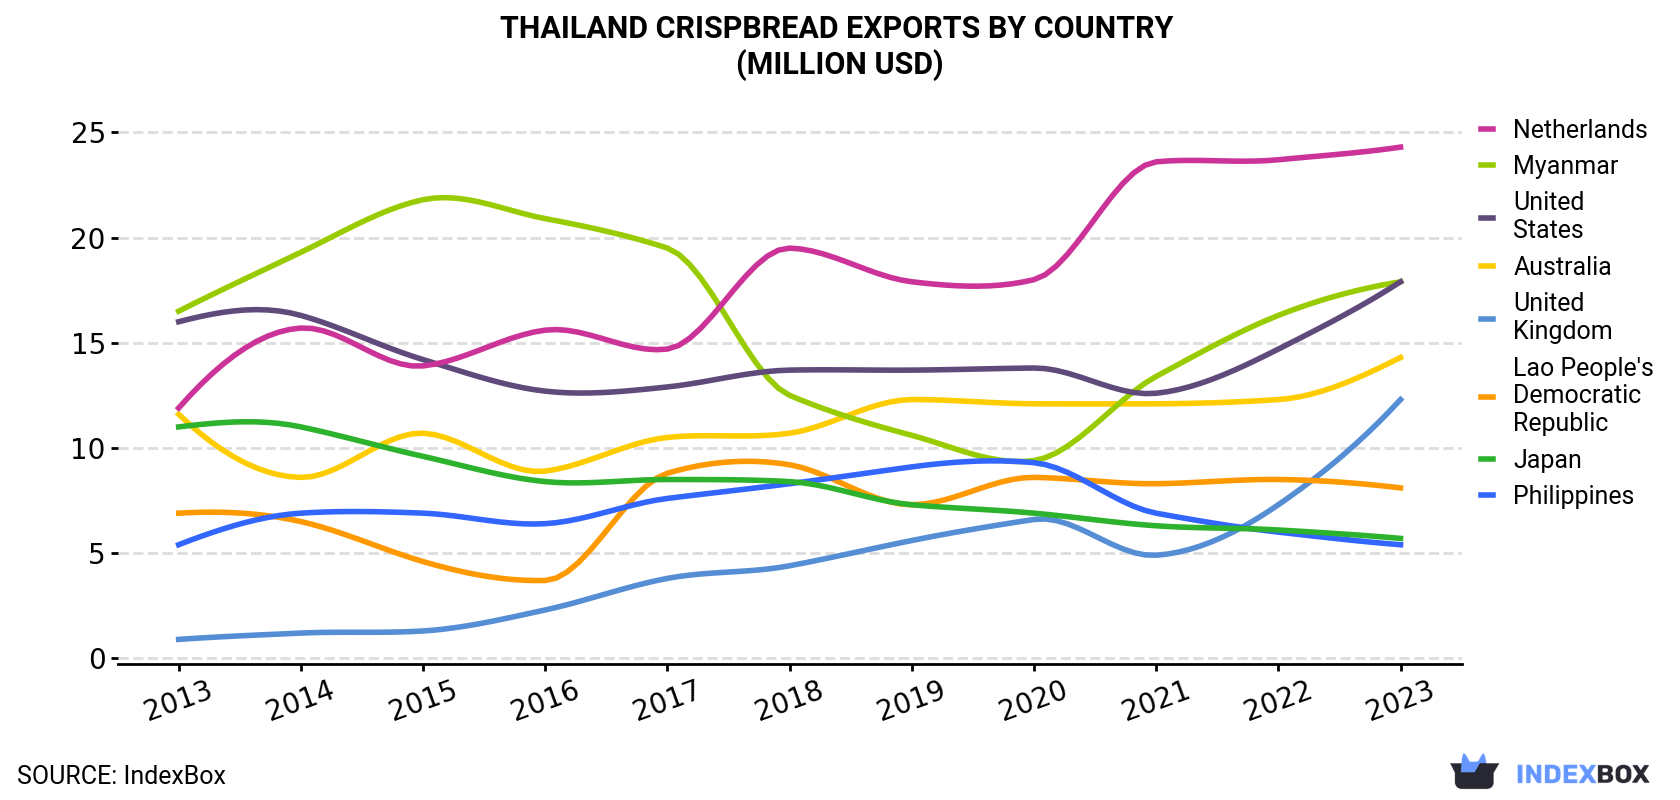 Thailand Crispbread Exports By Country (Million USD)